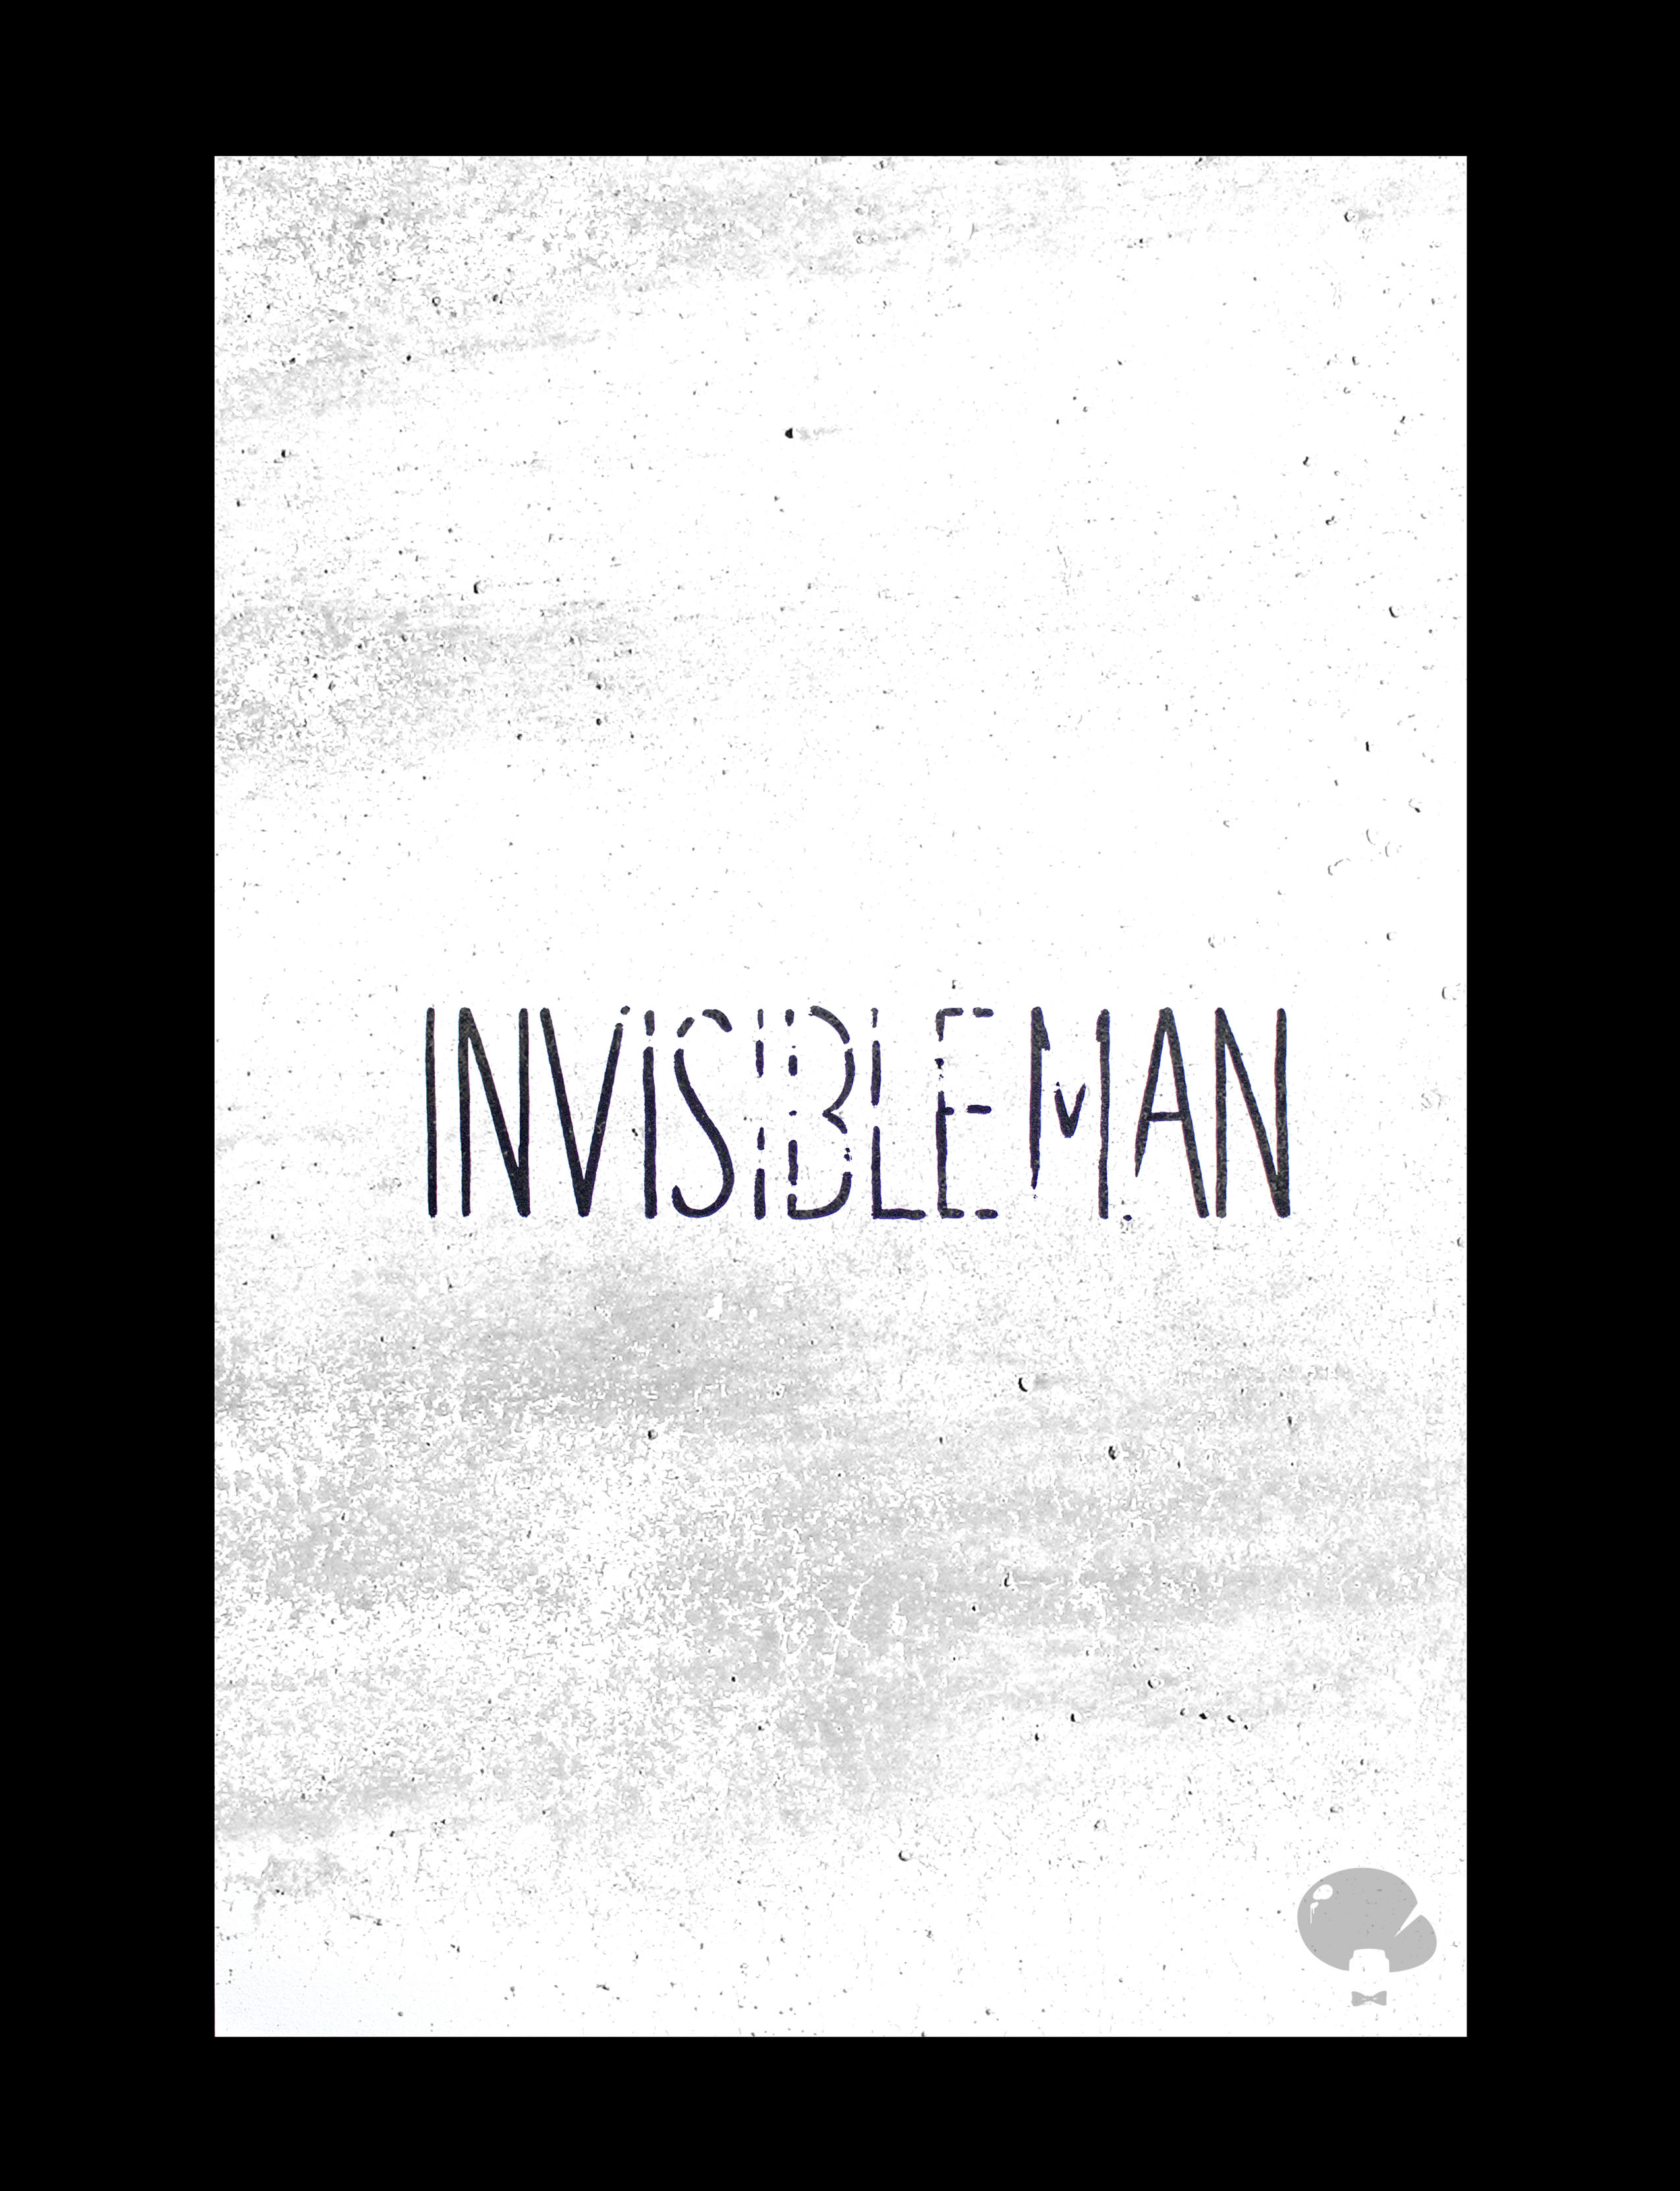 Homage pt2 - Invisible Man